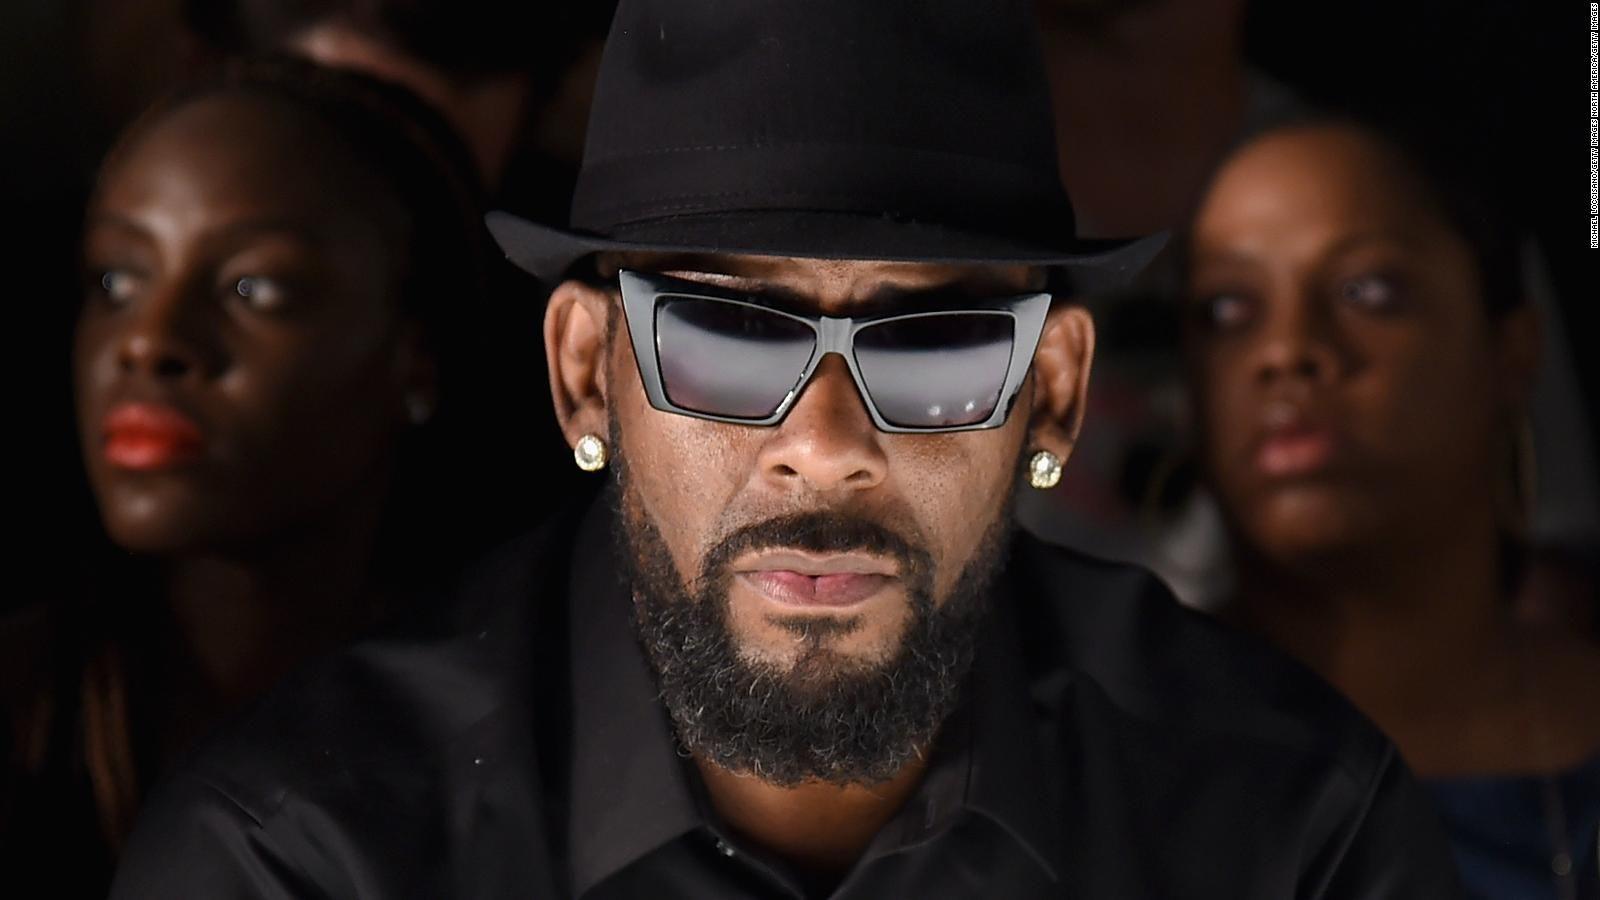 R. Kelly faces possible entry ban in Australia